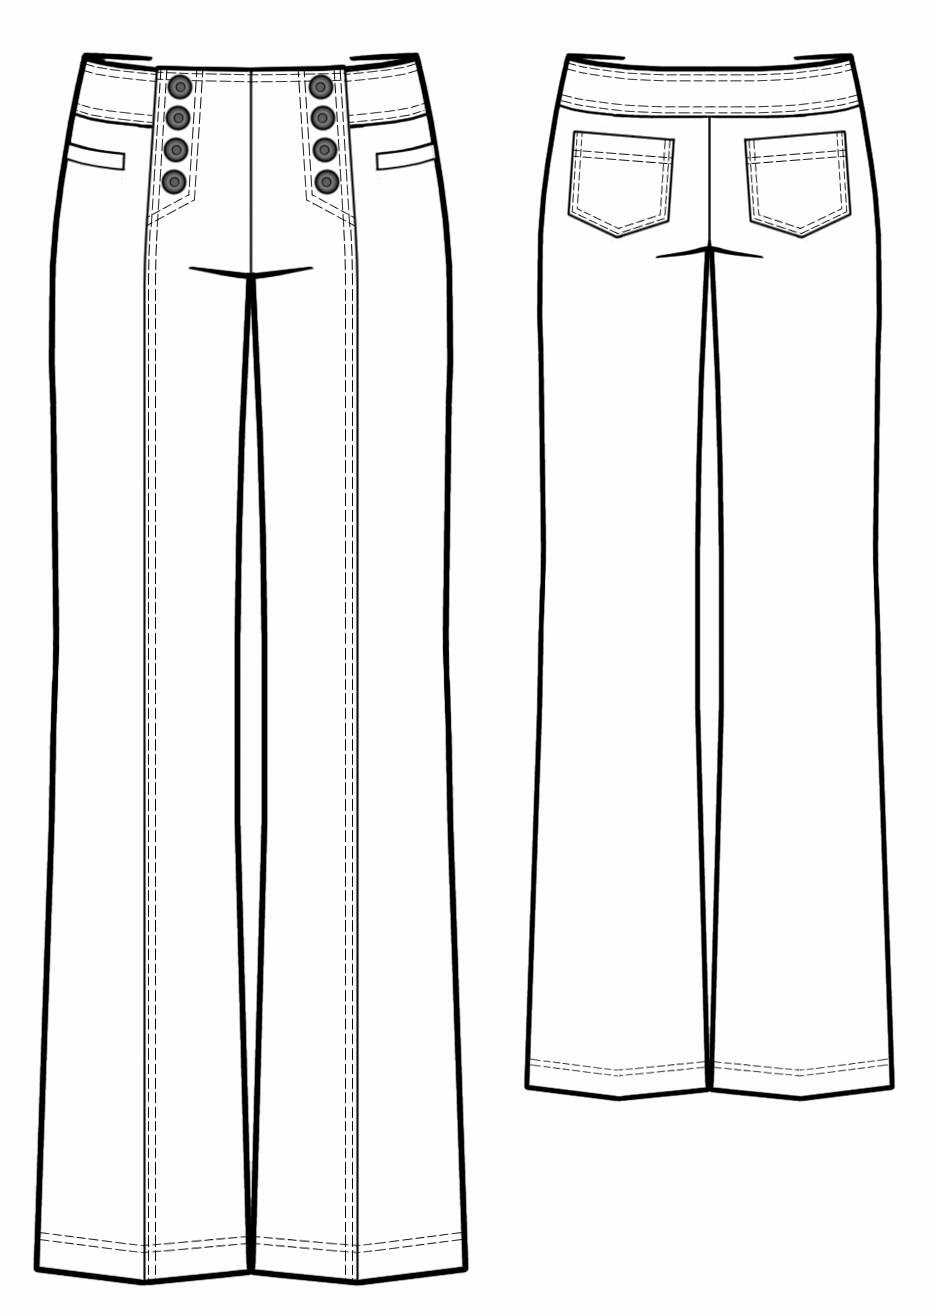 Pants With Decorative Closure - Sewing Pattern #5742. Made-to-measure ...